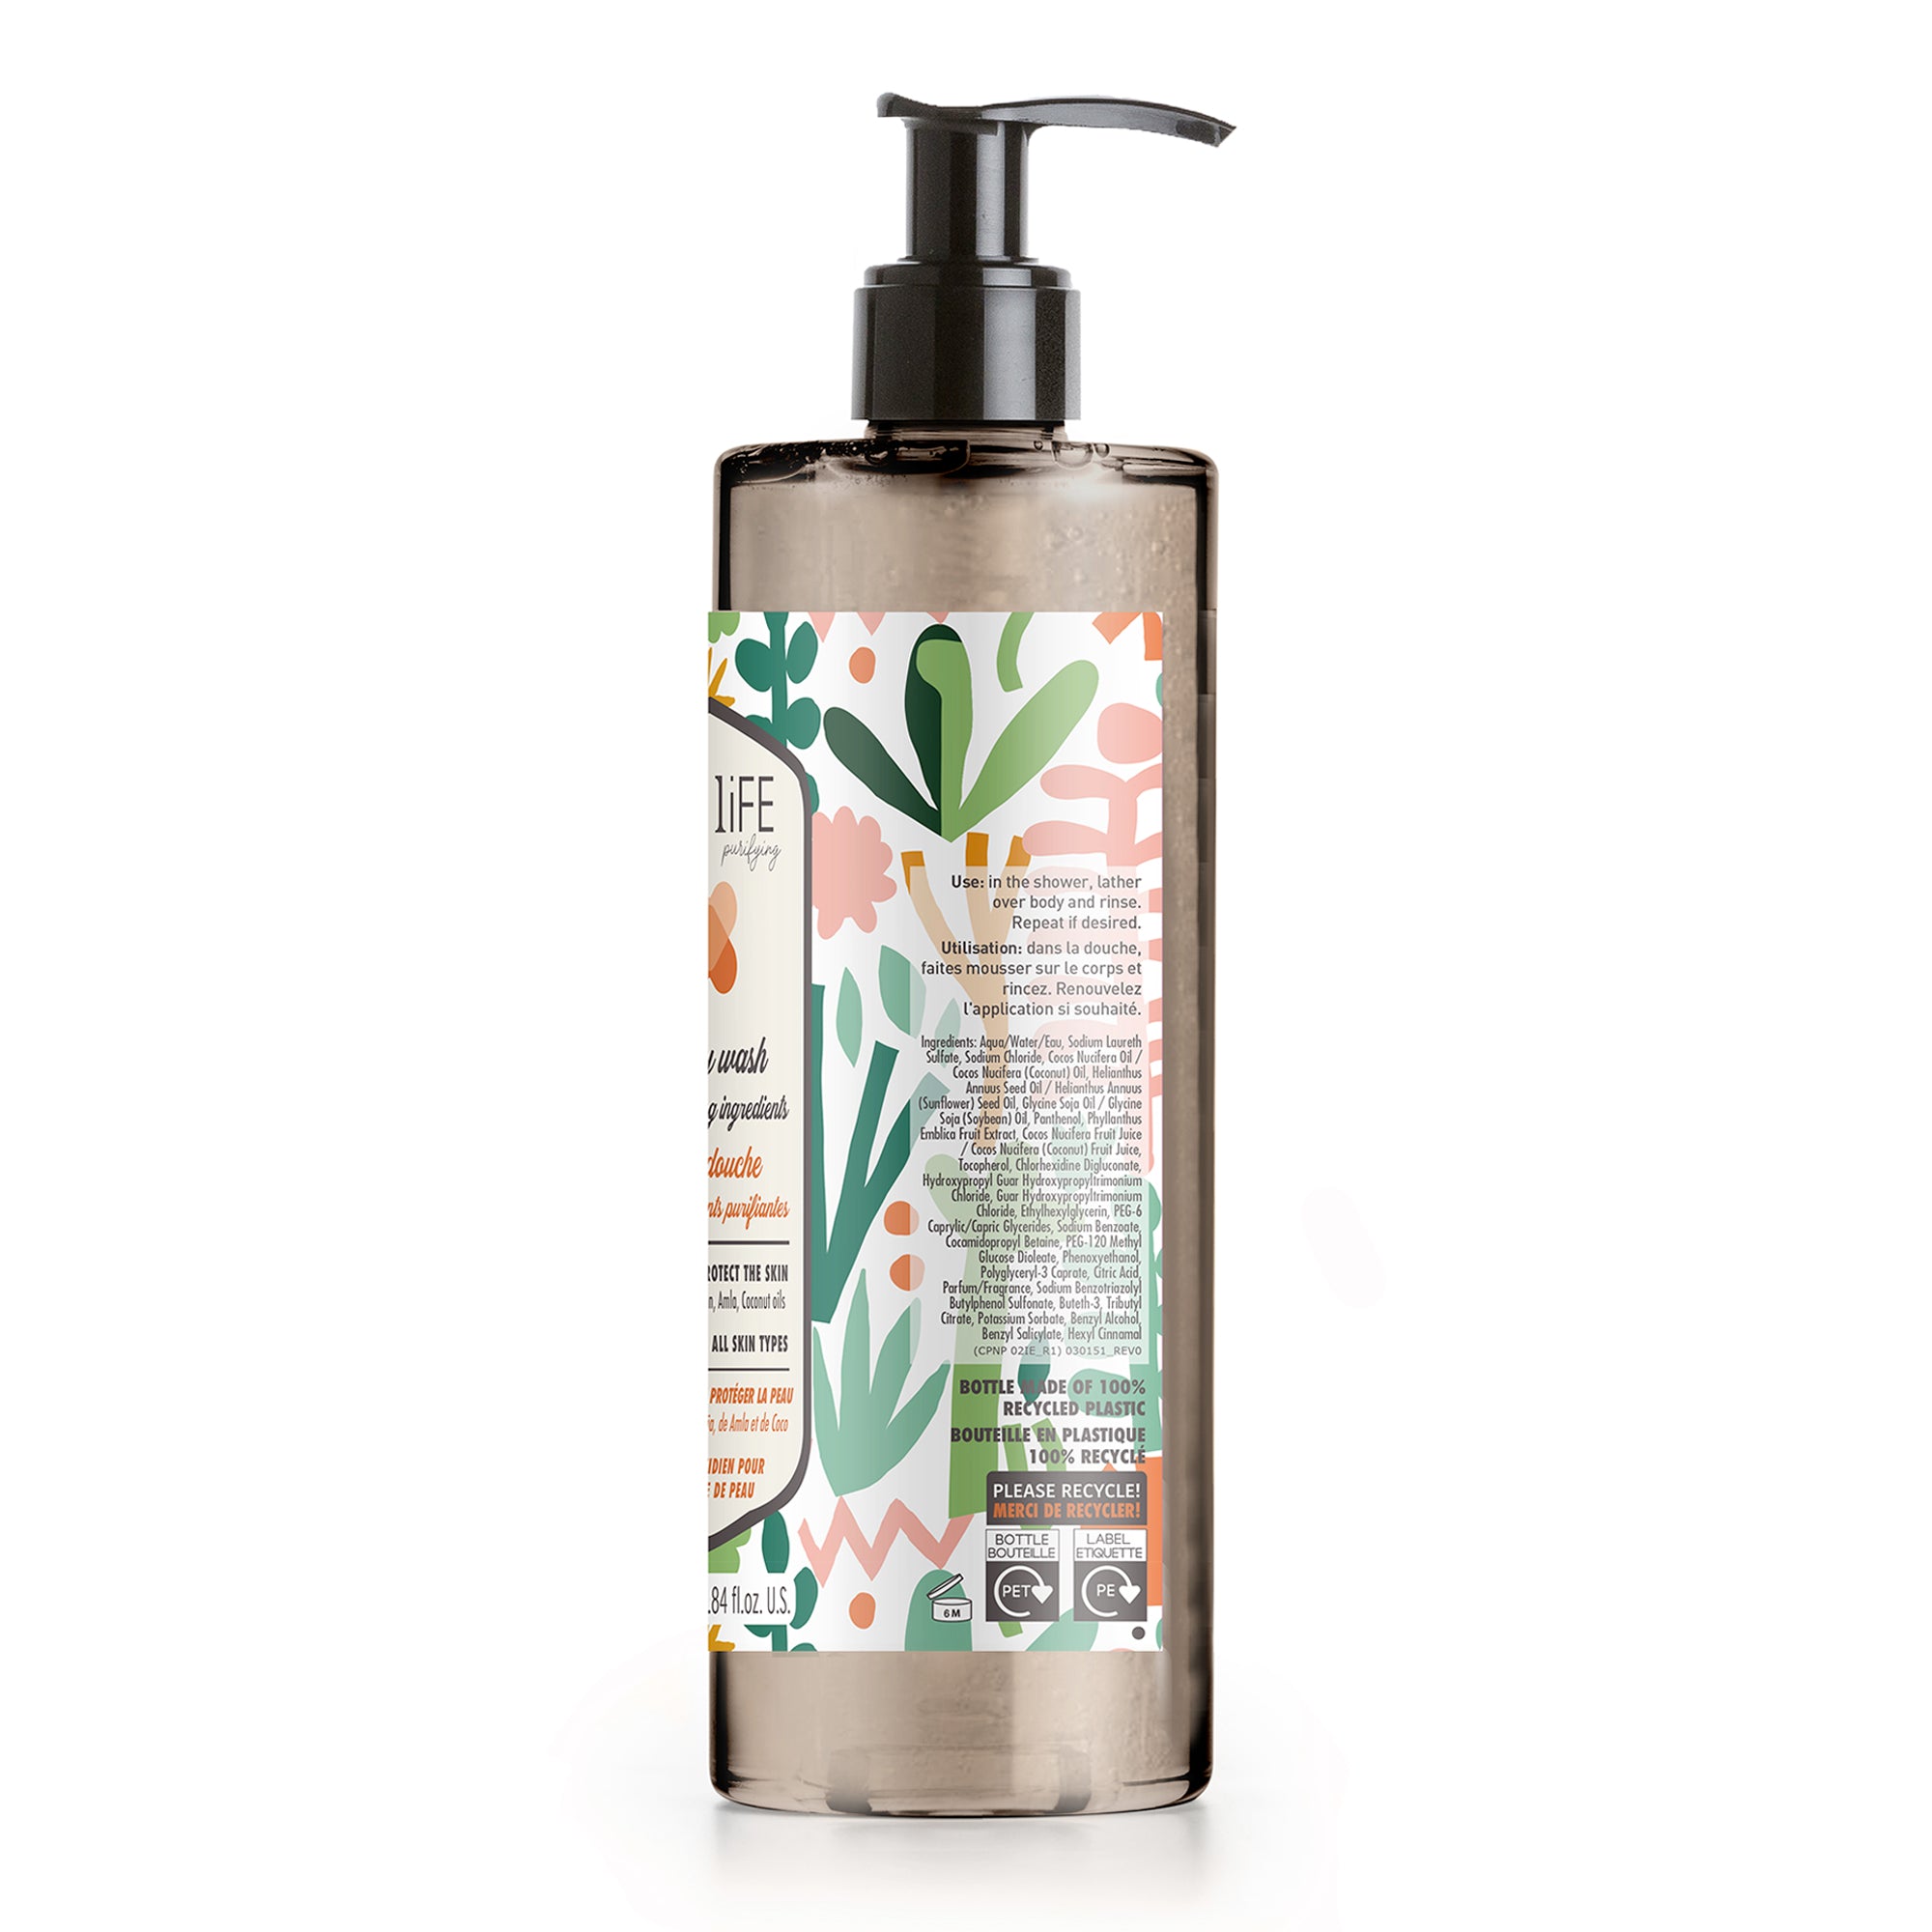 Gel For Life-Purifying Body Wash With Purifying Ingredients (12.84 Fl oz)